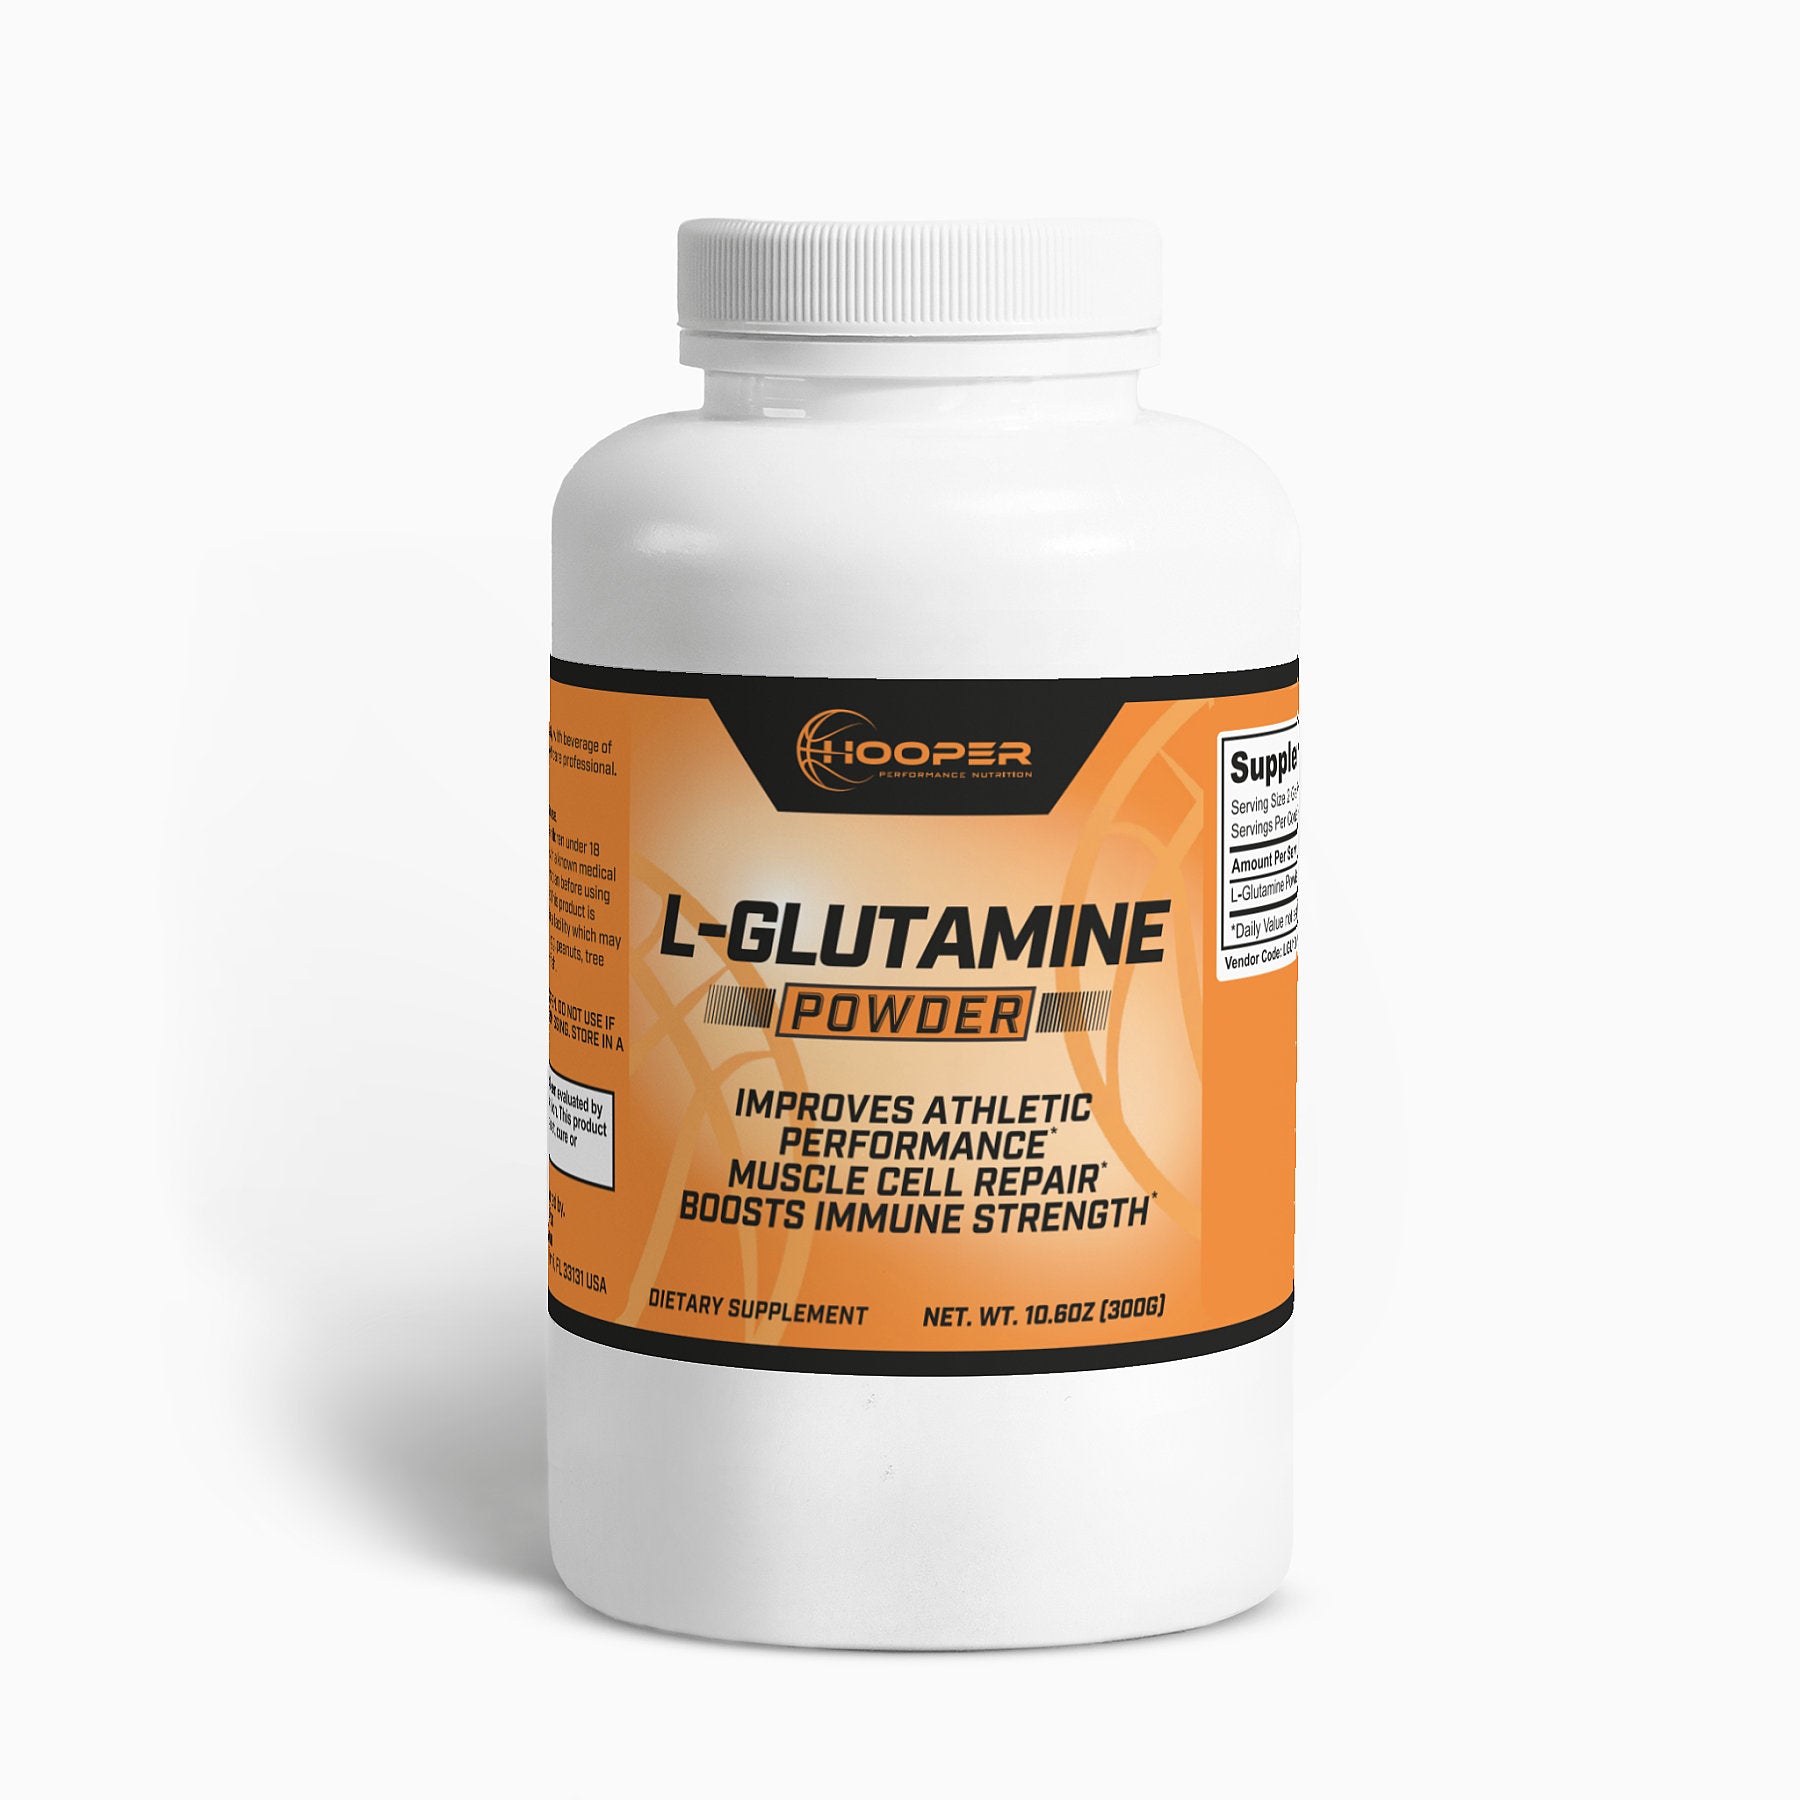 Bottle of L-Glutamine powder dietary supplement with health claims on label.